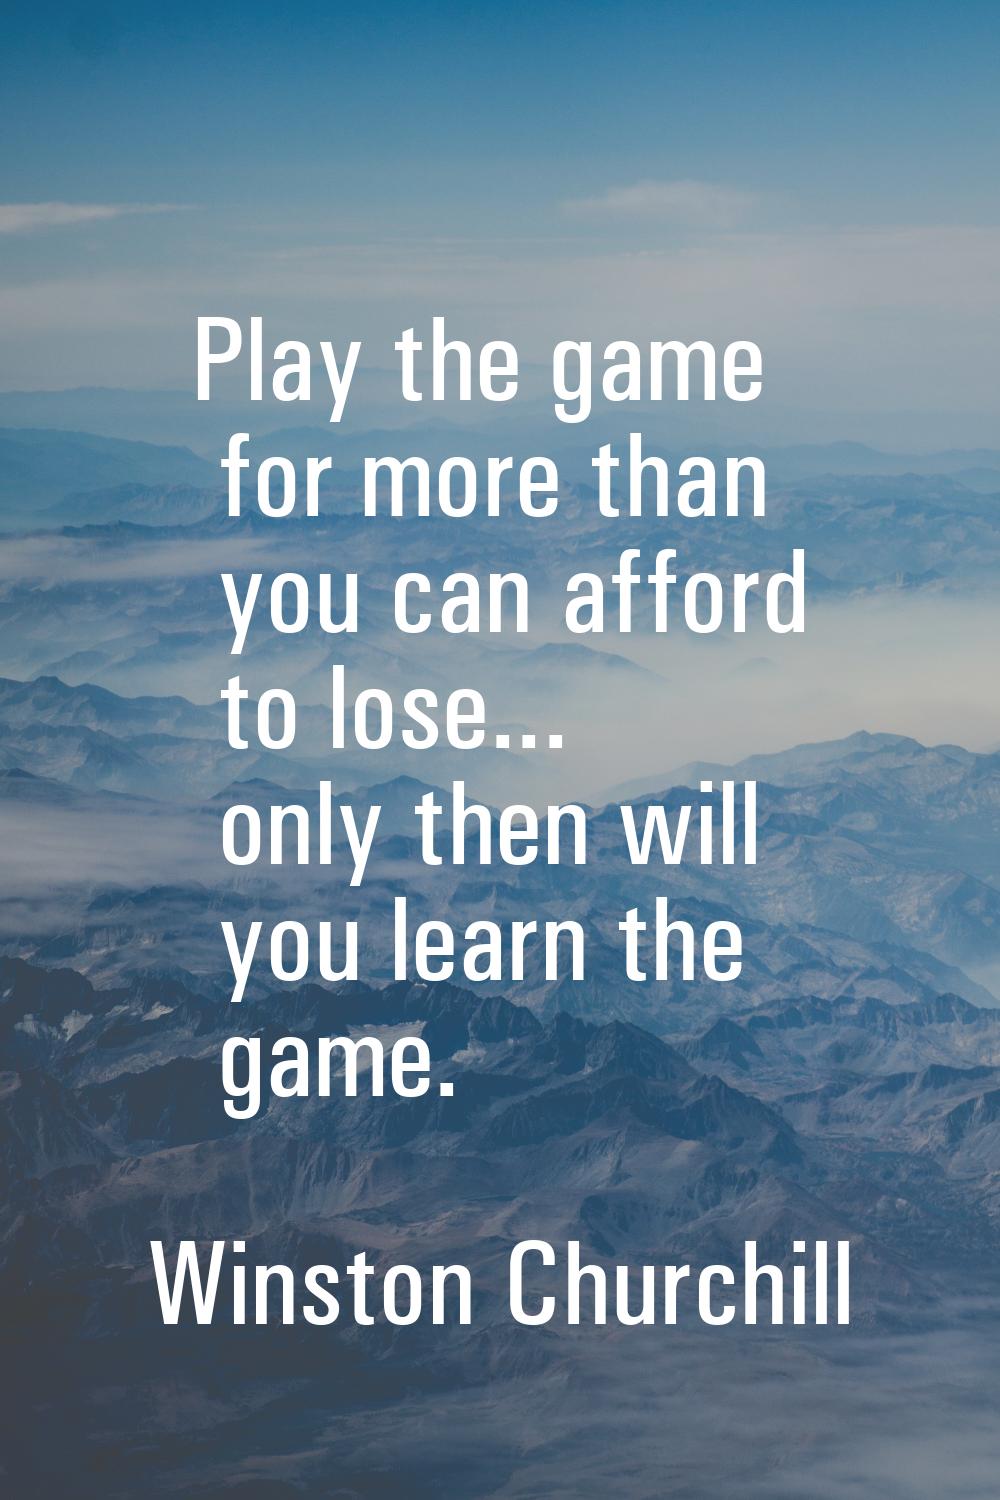 Play the game for more than you can afford to lose... only then will you learn the game.